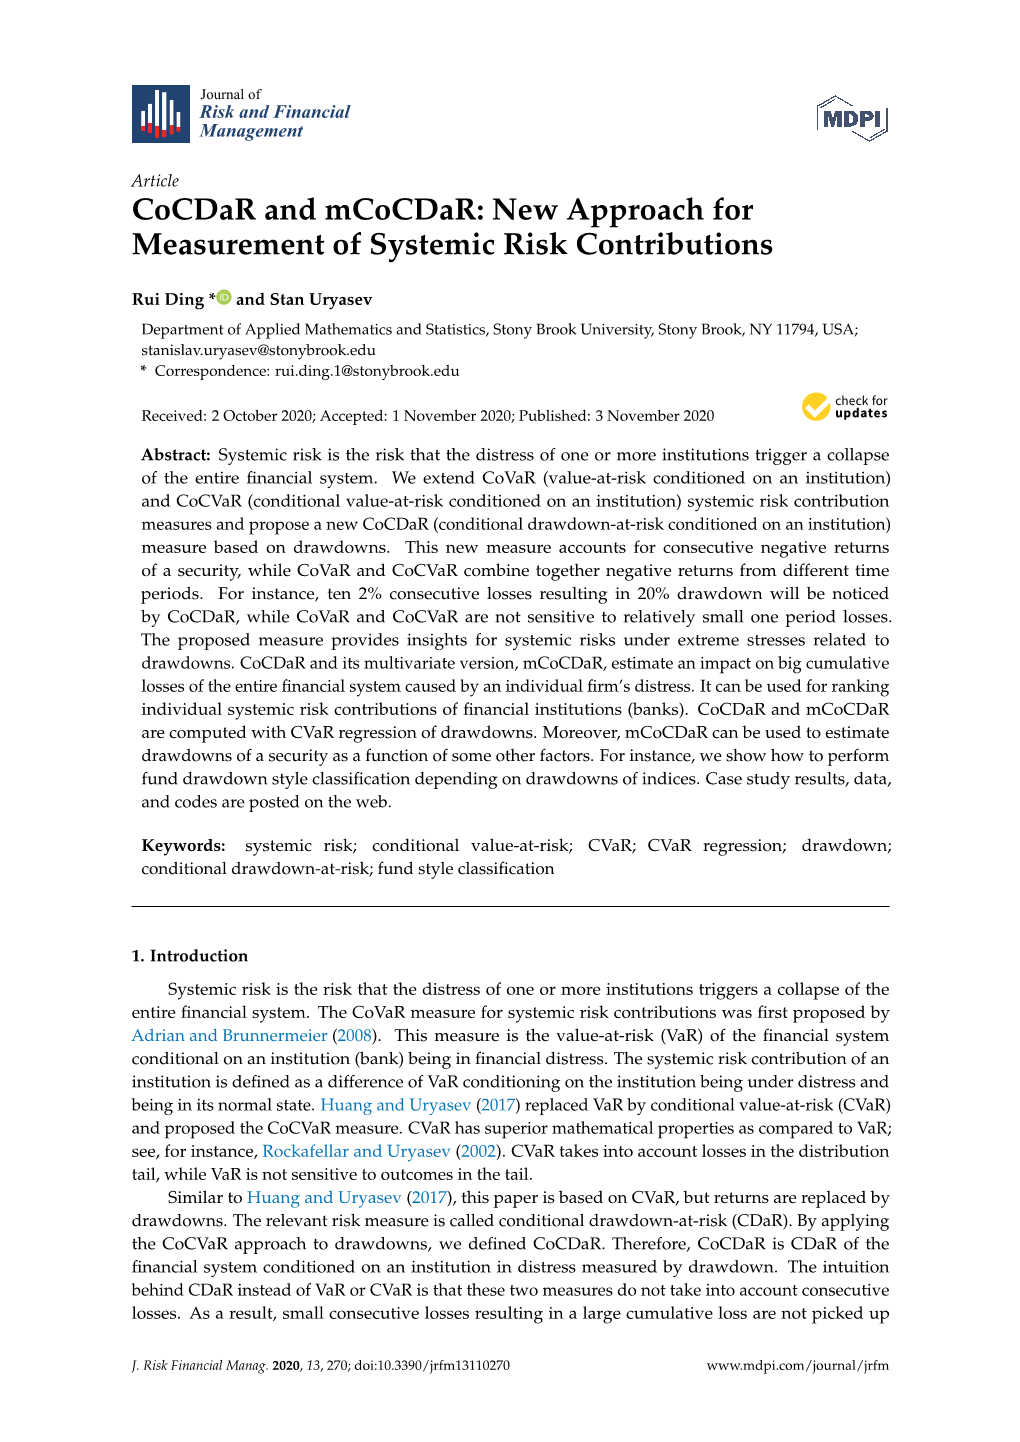 New Approach for Measurement of Systemic Risk Contributions